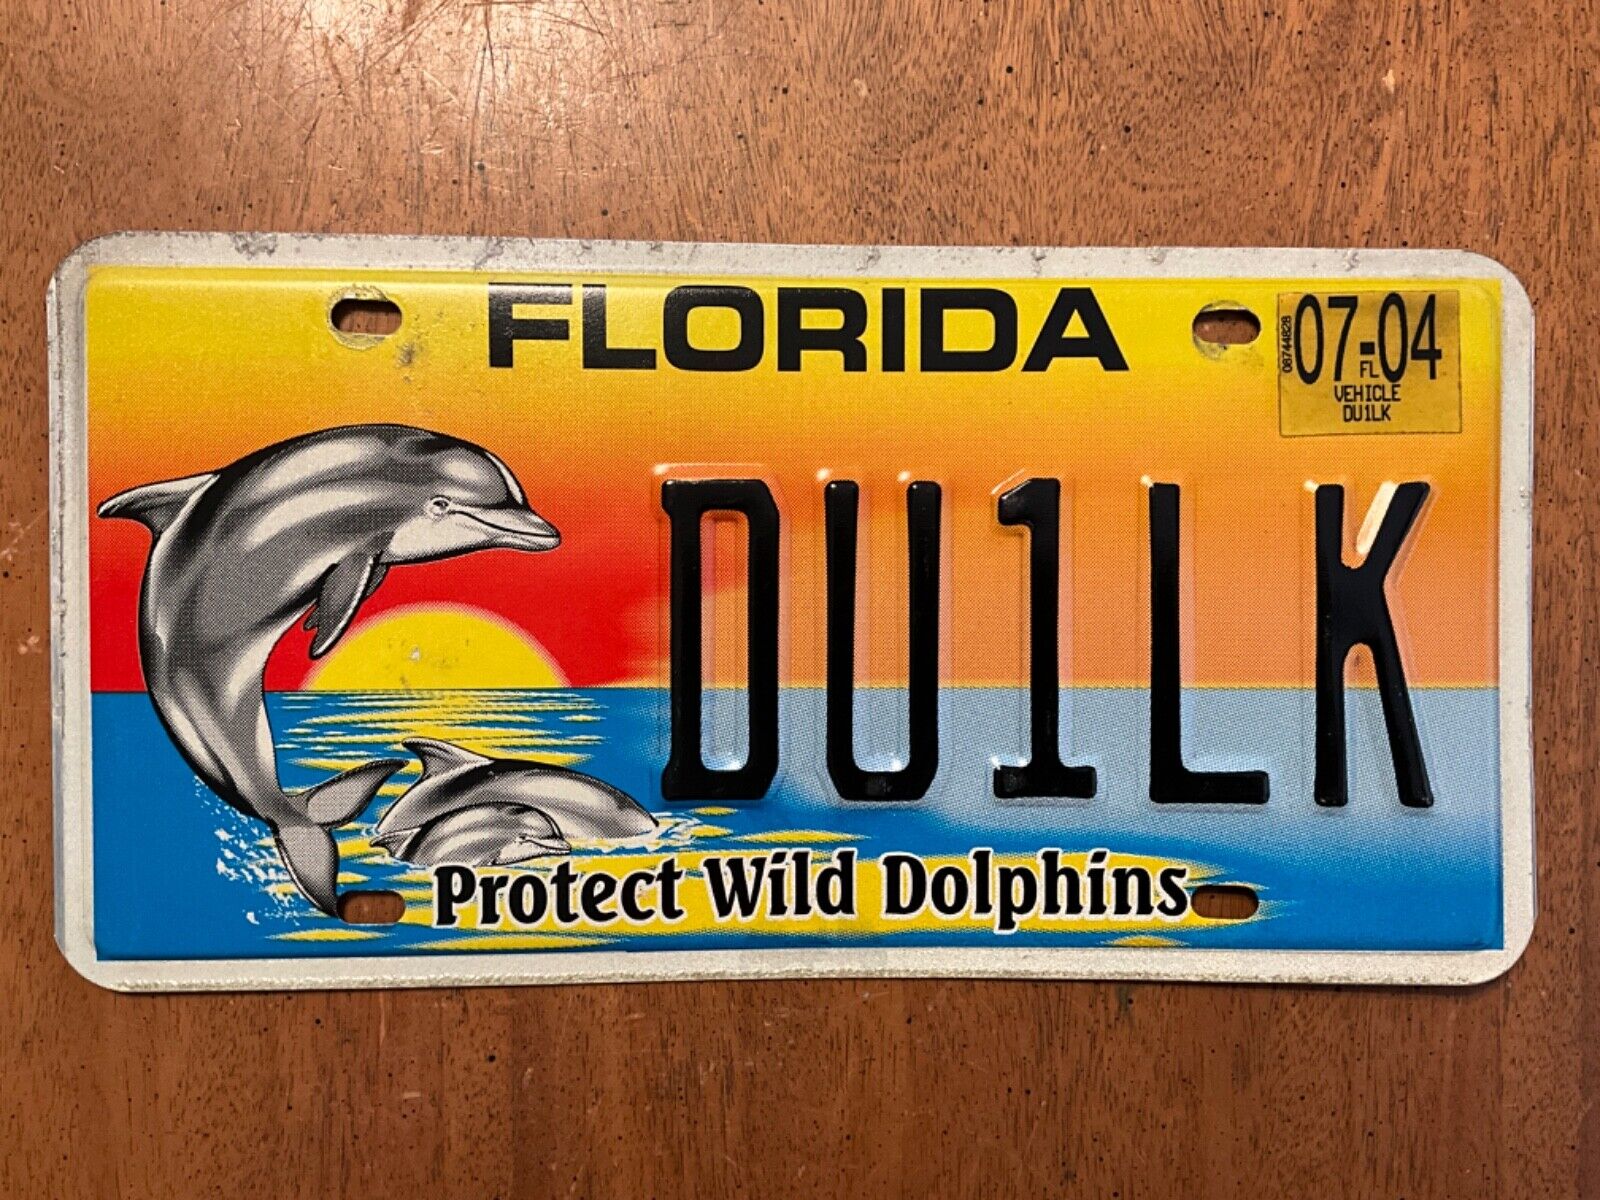 2004 Florida Protect Wild Dolphins License Plate Tag specialty DU1LK sunset